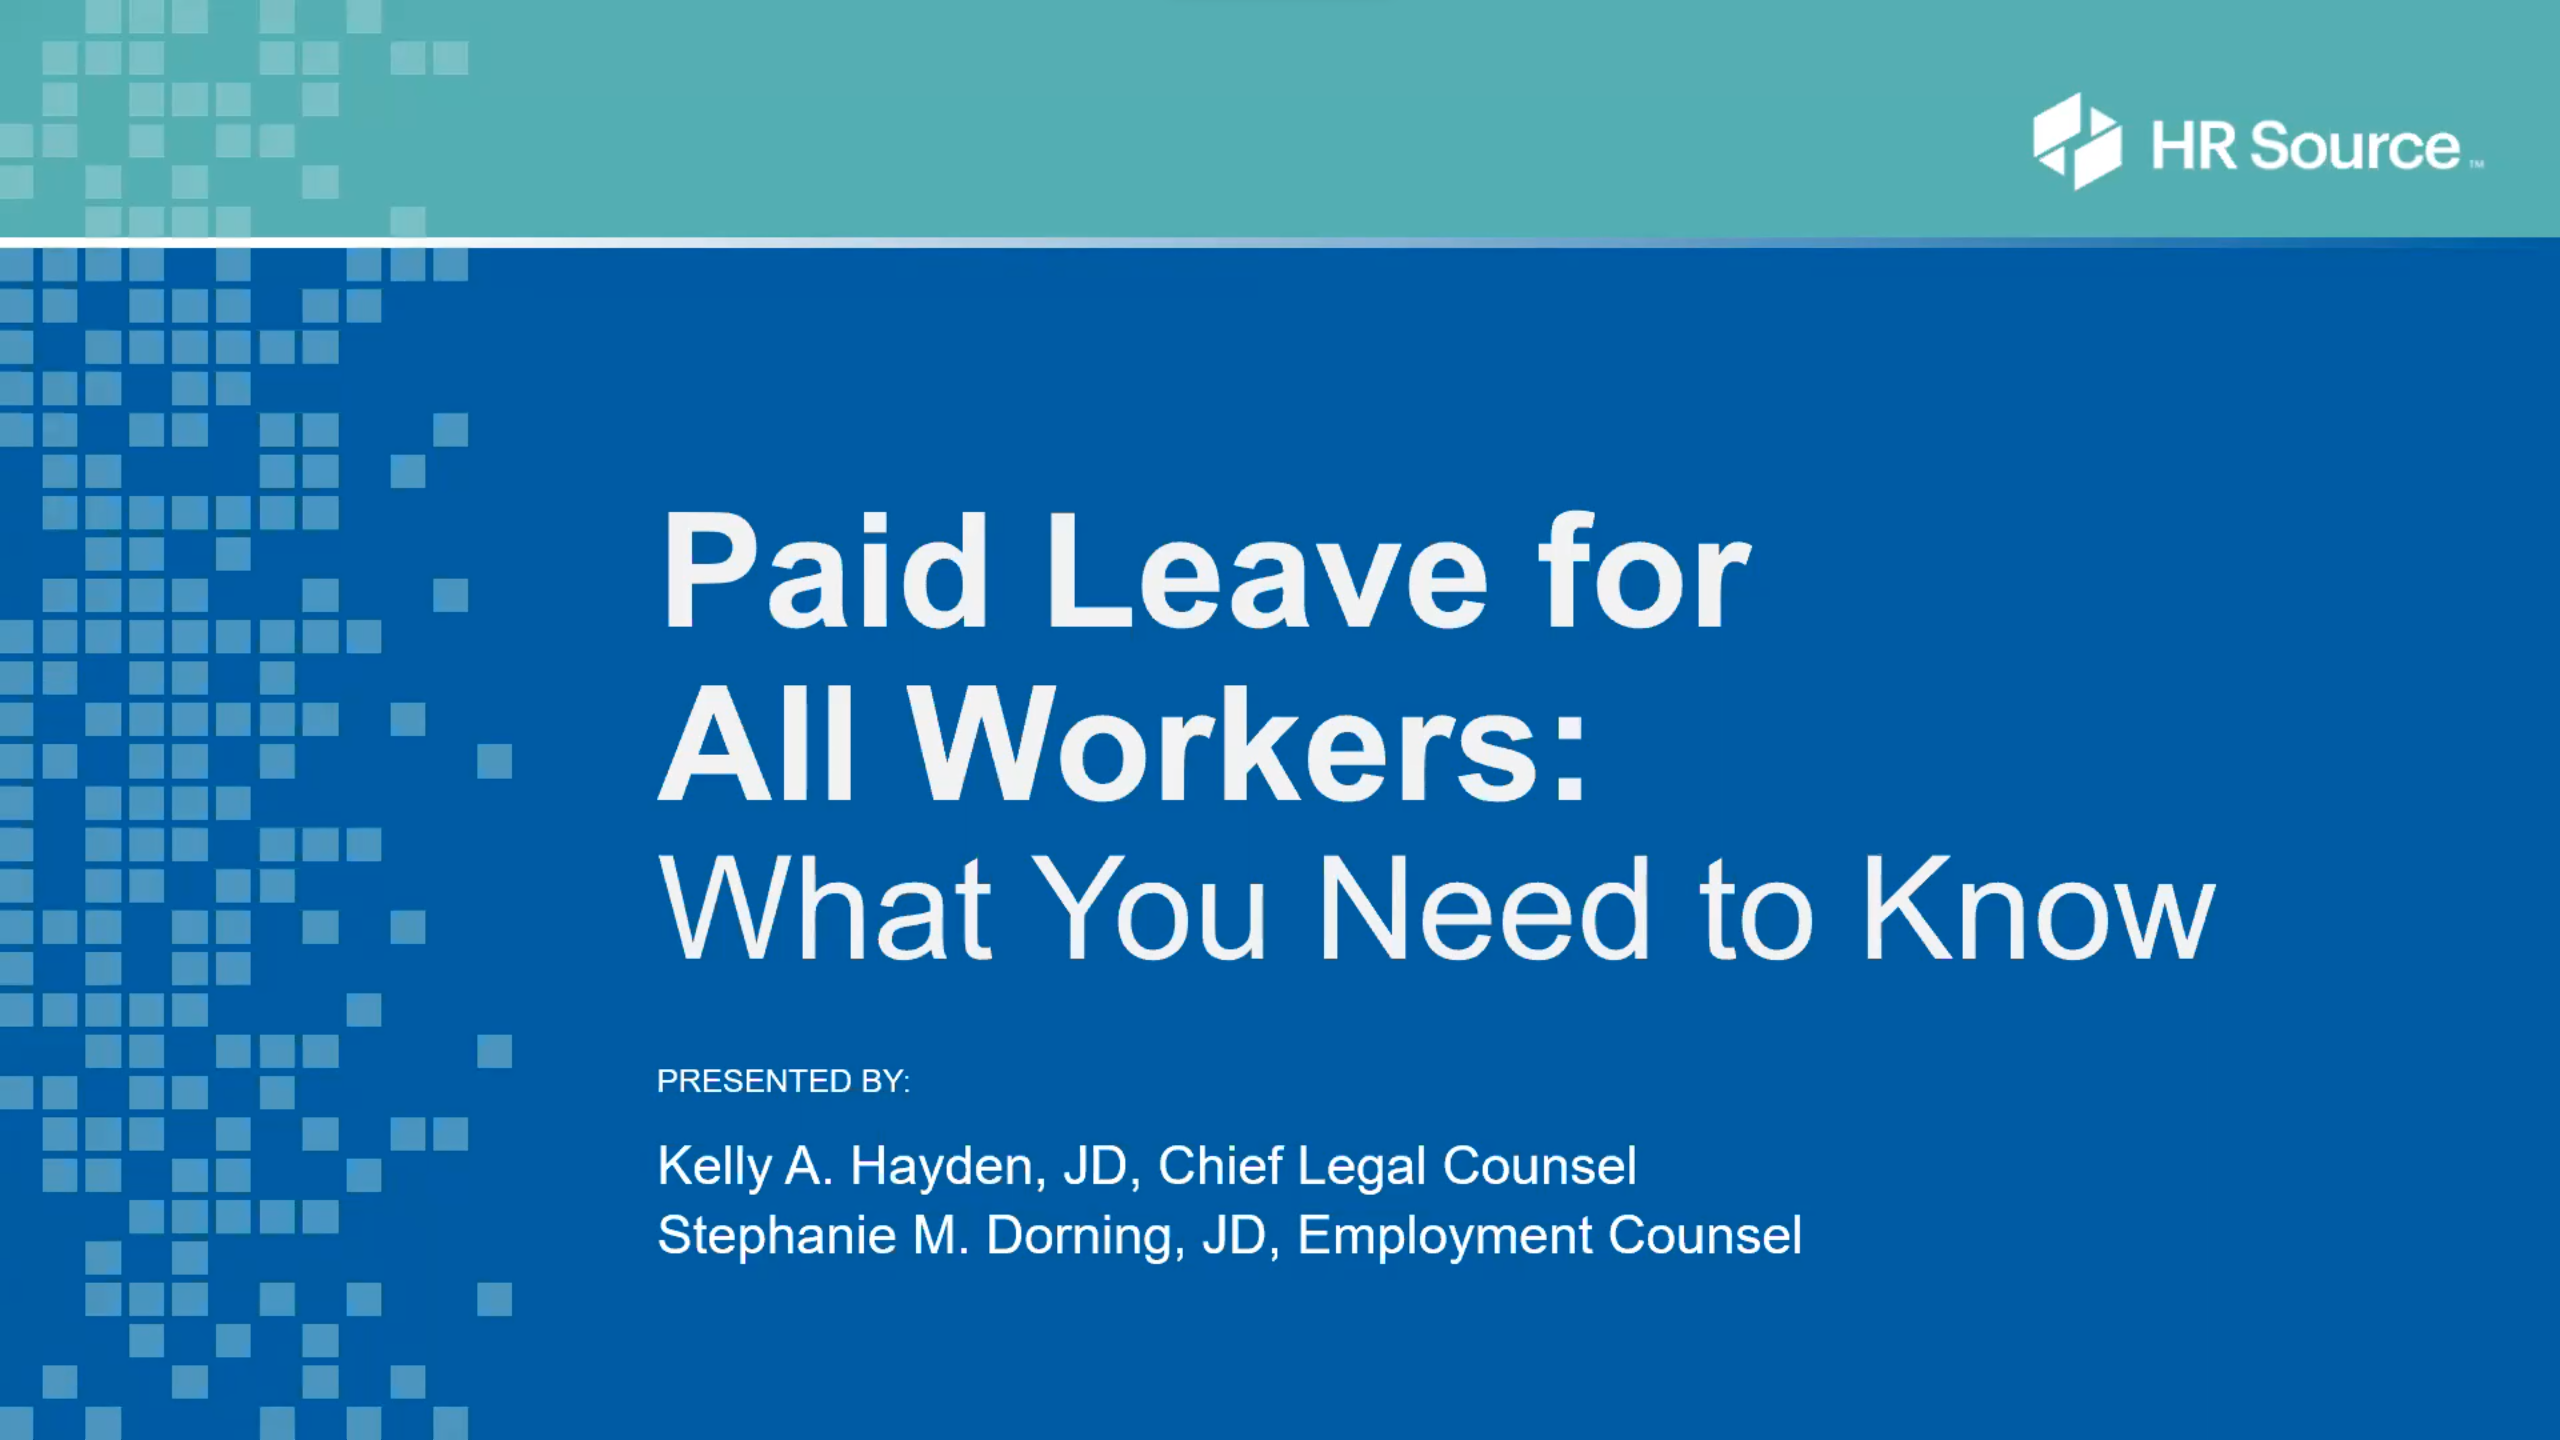 Paid Leave for All Workers: What You Need to Know